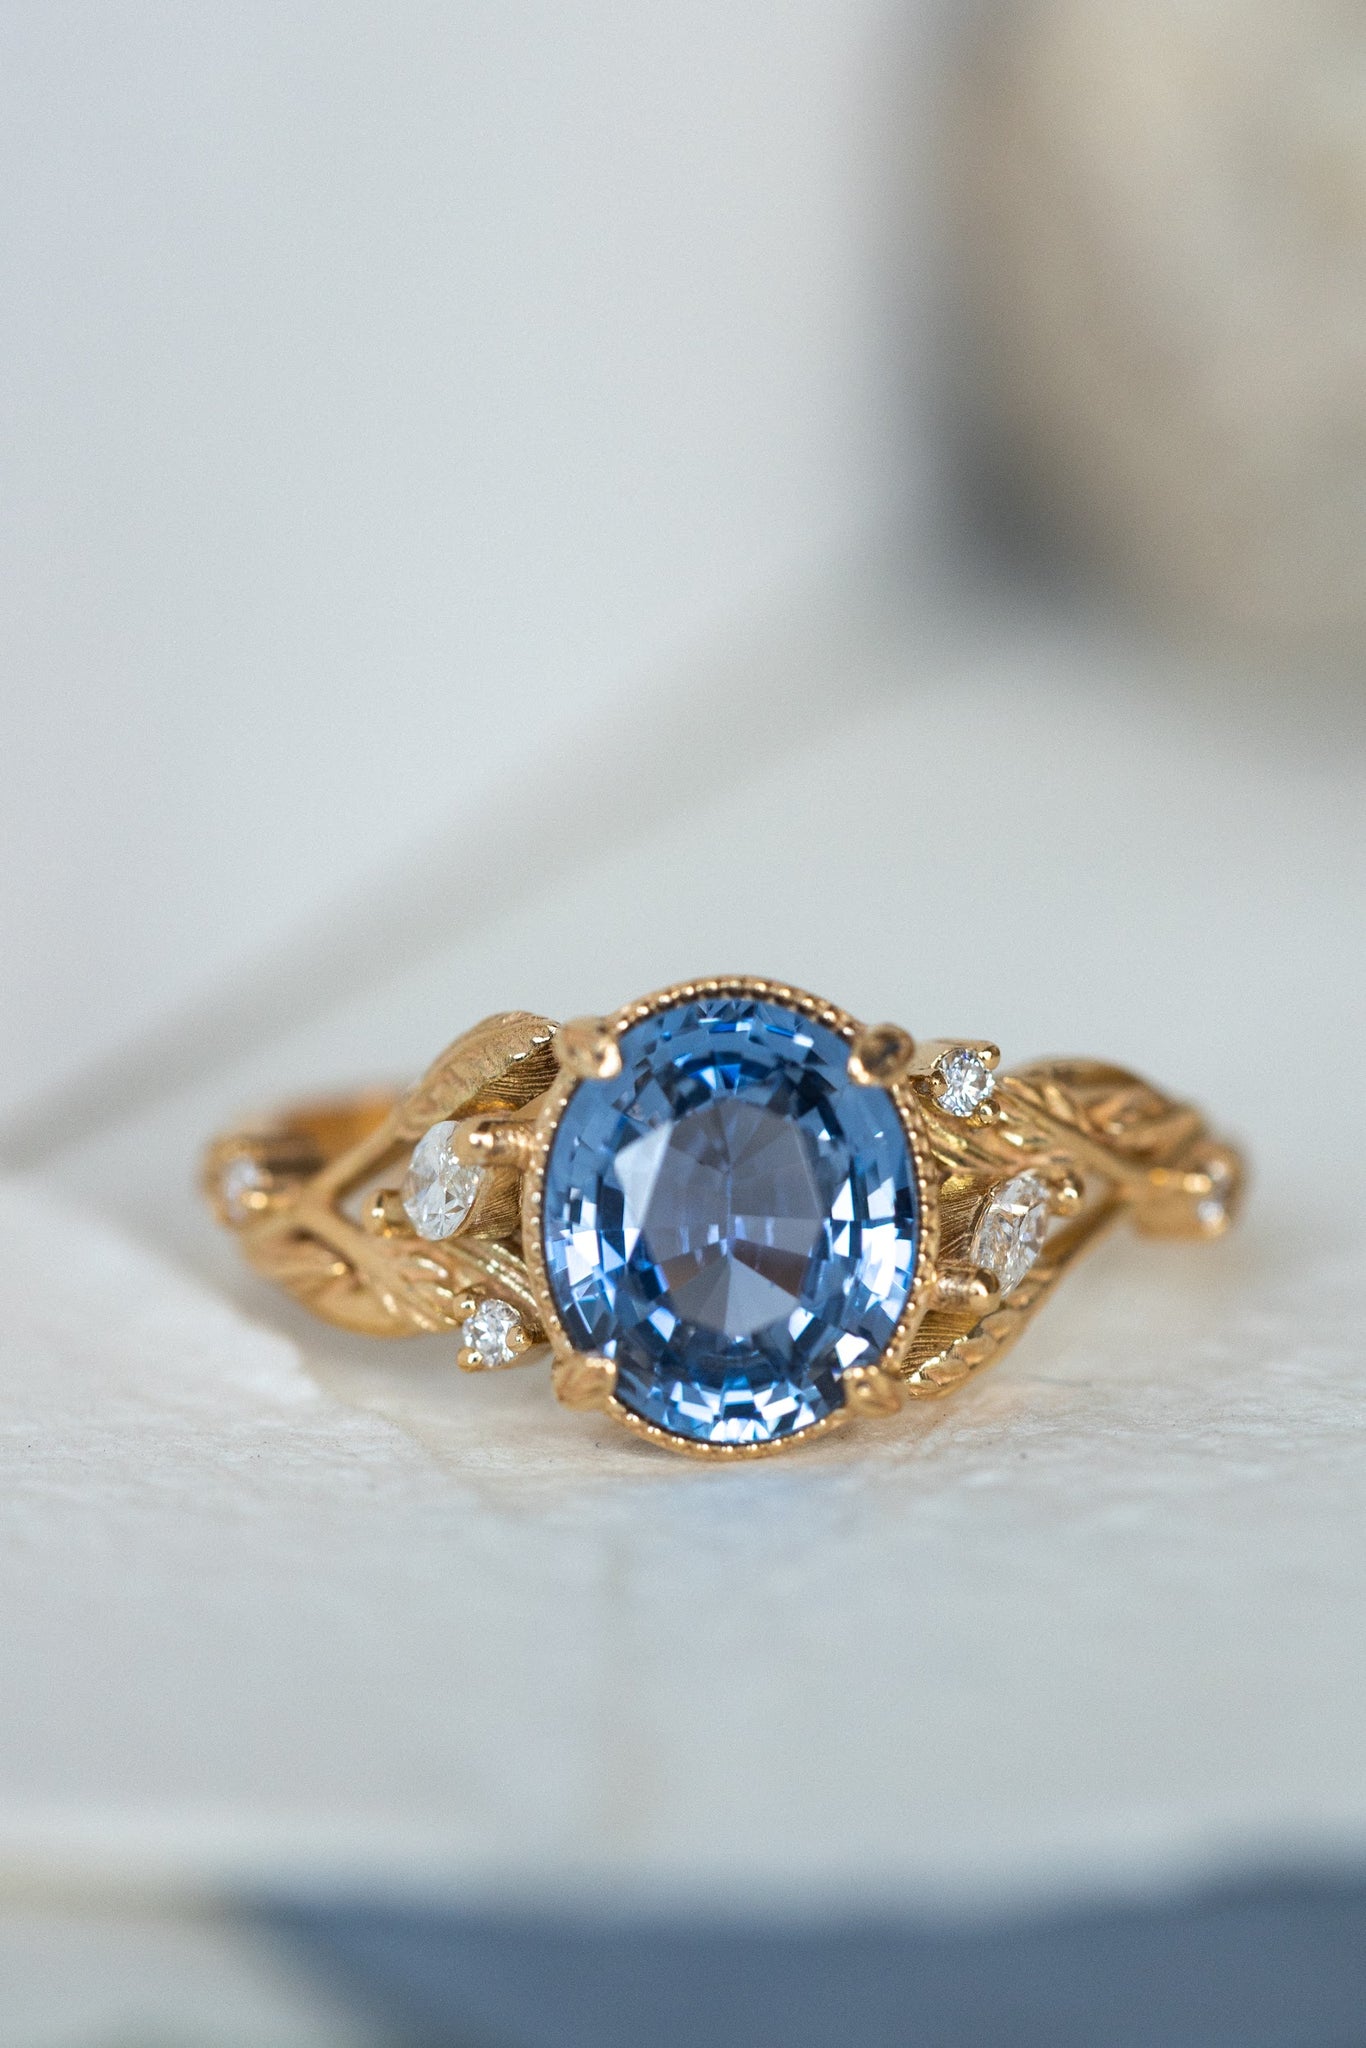 READY TO SHIP: Patricia ring in 14K yellow gold, natural sapphire oval cut 8x6* mm, accent natural diamonds, AVAILABLE RING SIZES: 6-8US - Eden Garden Jewelry™